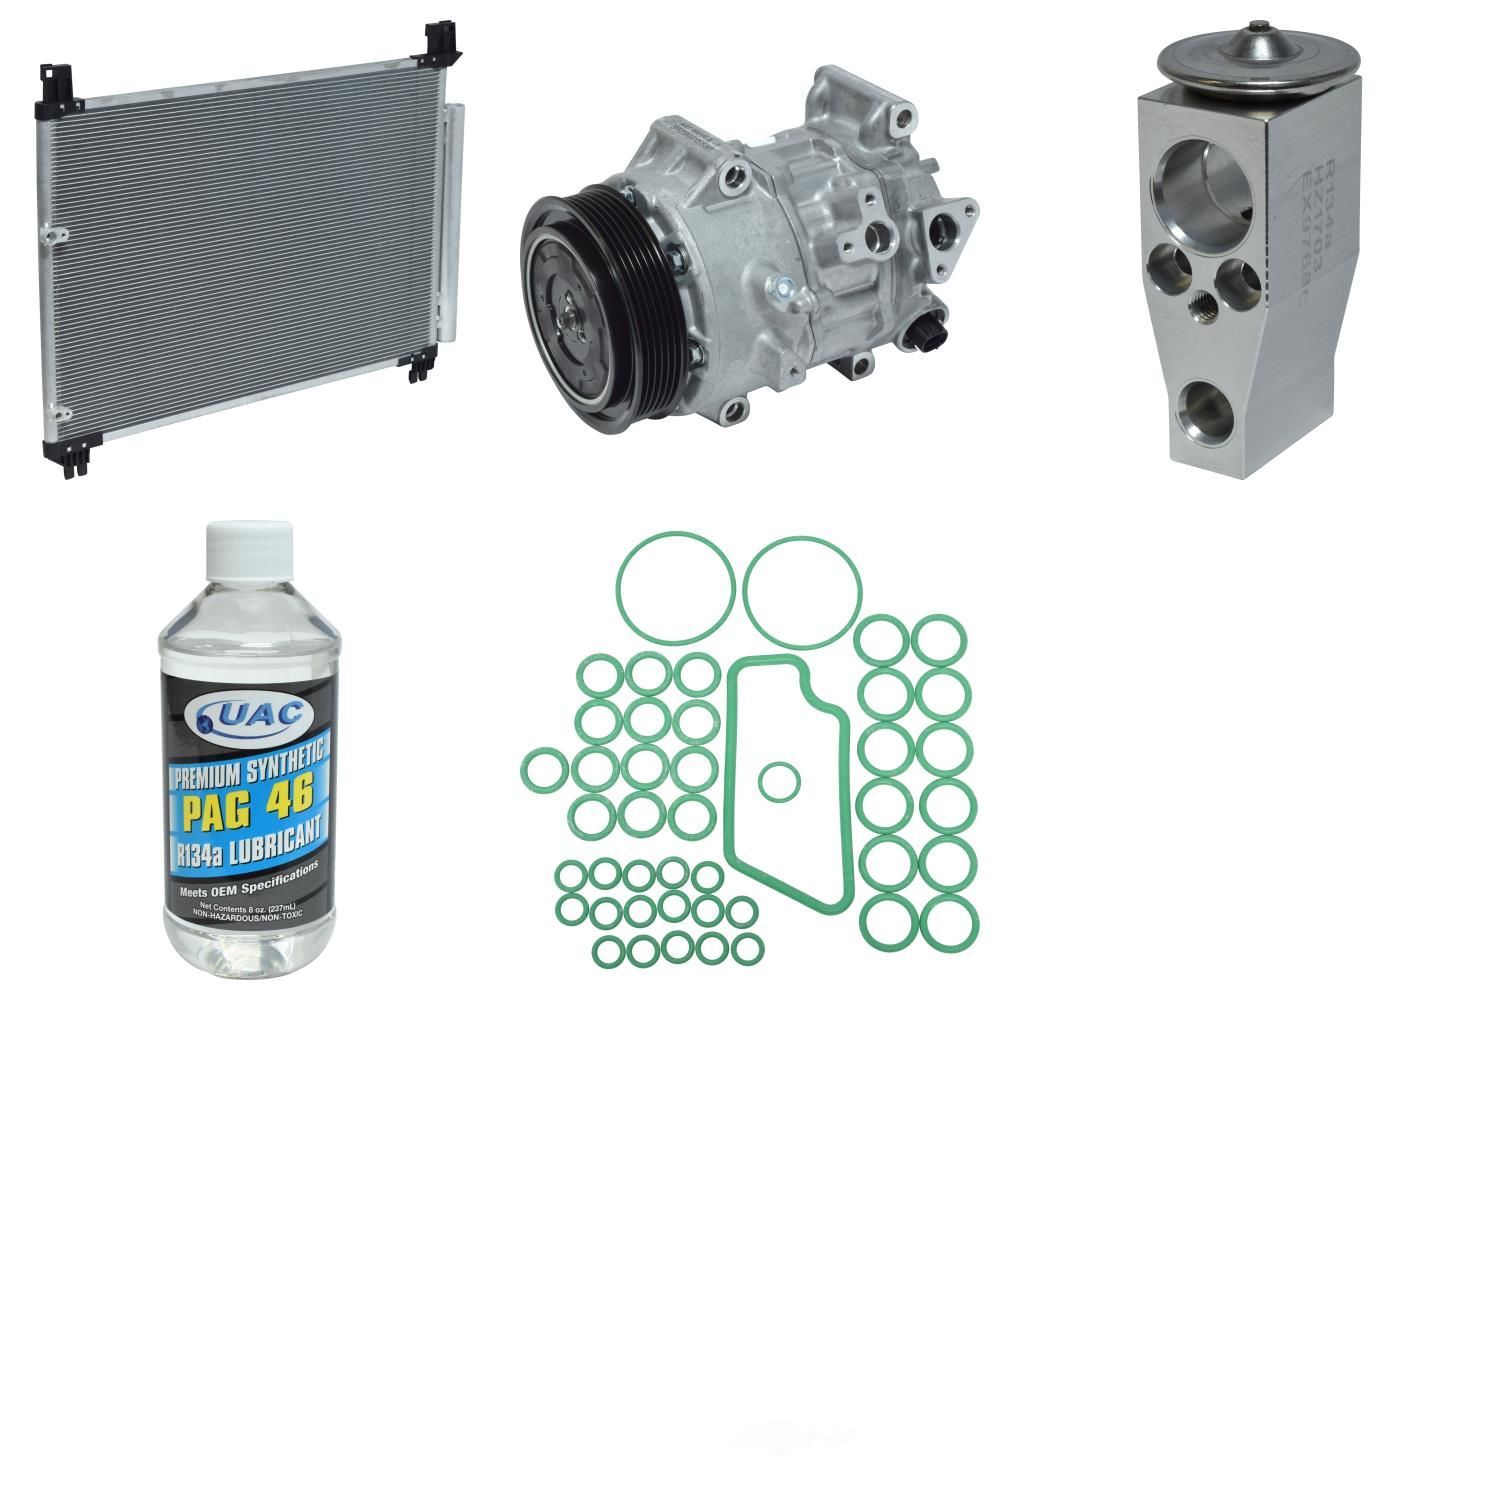 UNIVERSAL AIR CONDITIONER, INC. - Compressor-condenser Replacement Kit - UAC KT 5560A